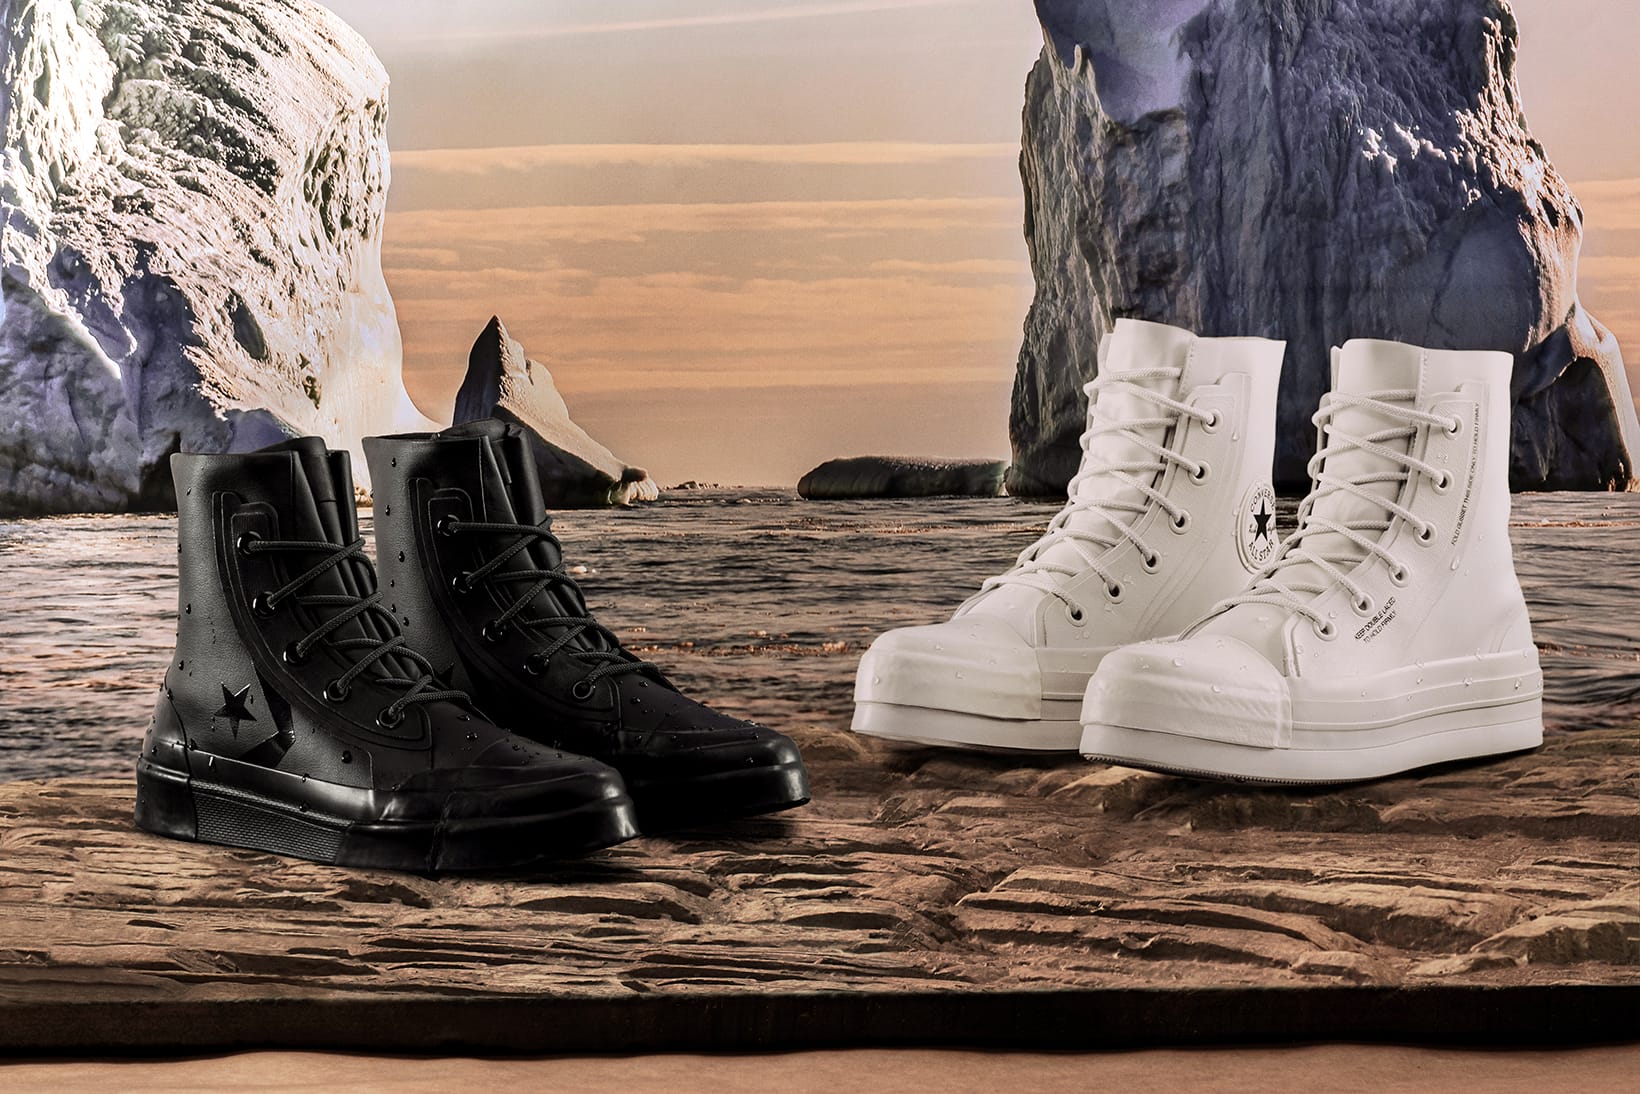 converse air force boots